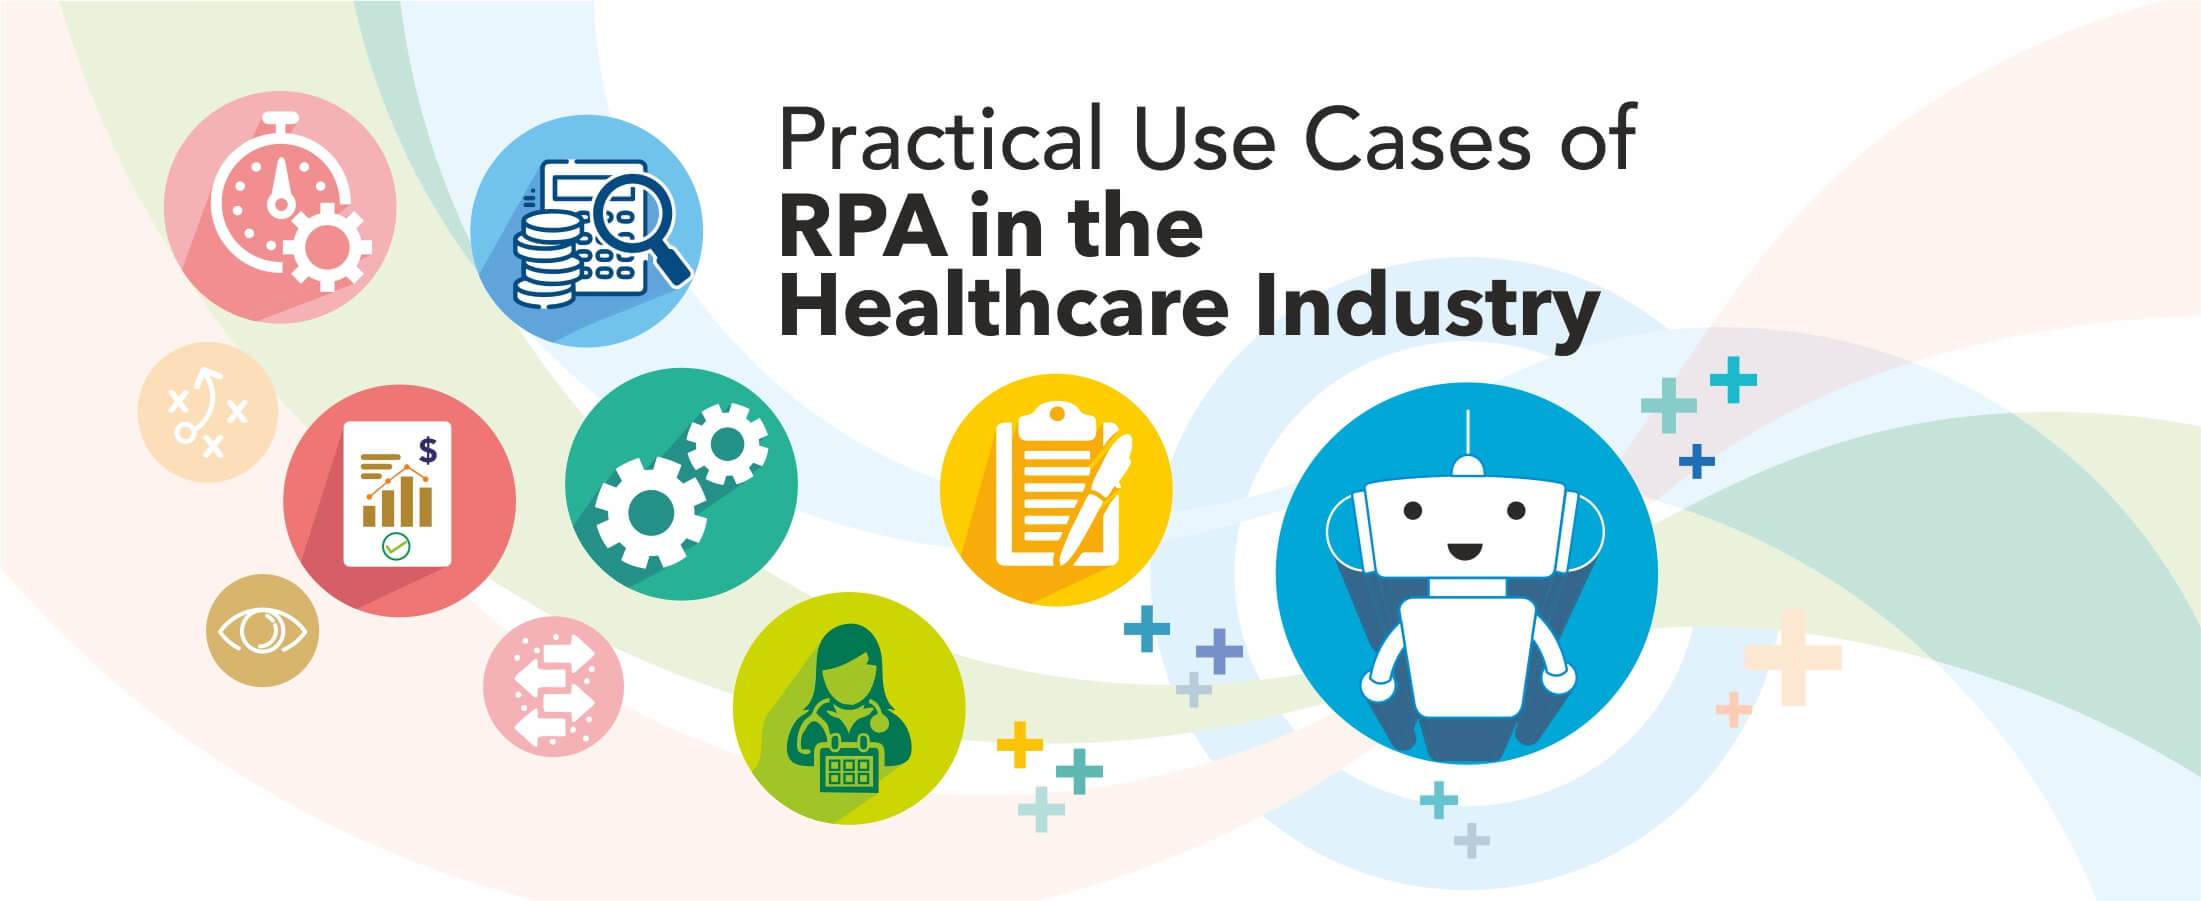 Practical Use Cases of RPA in the Healthcare Industry